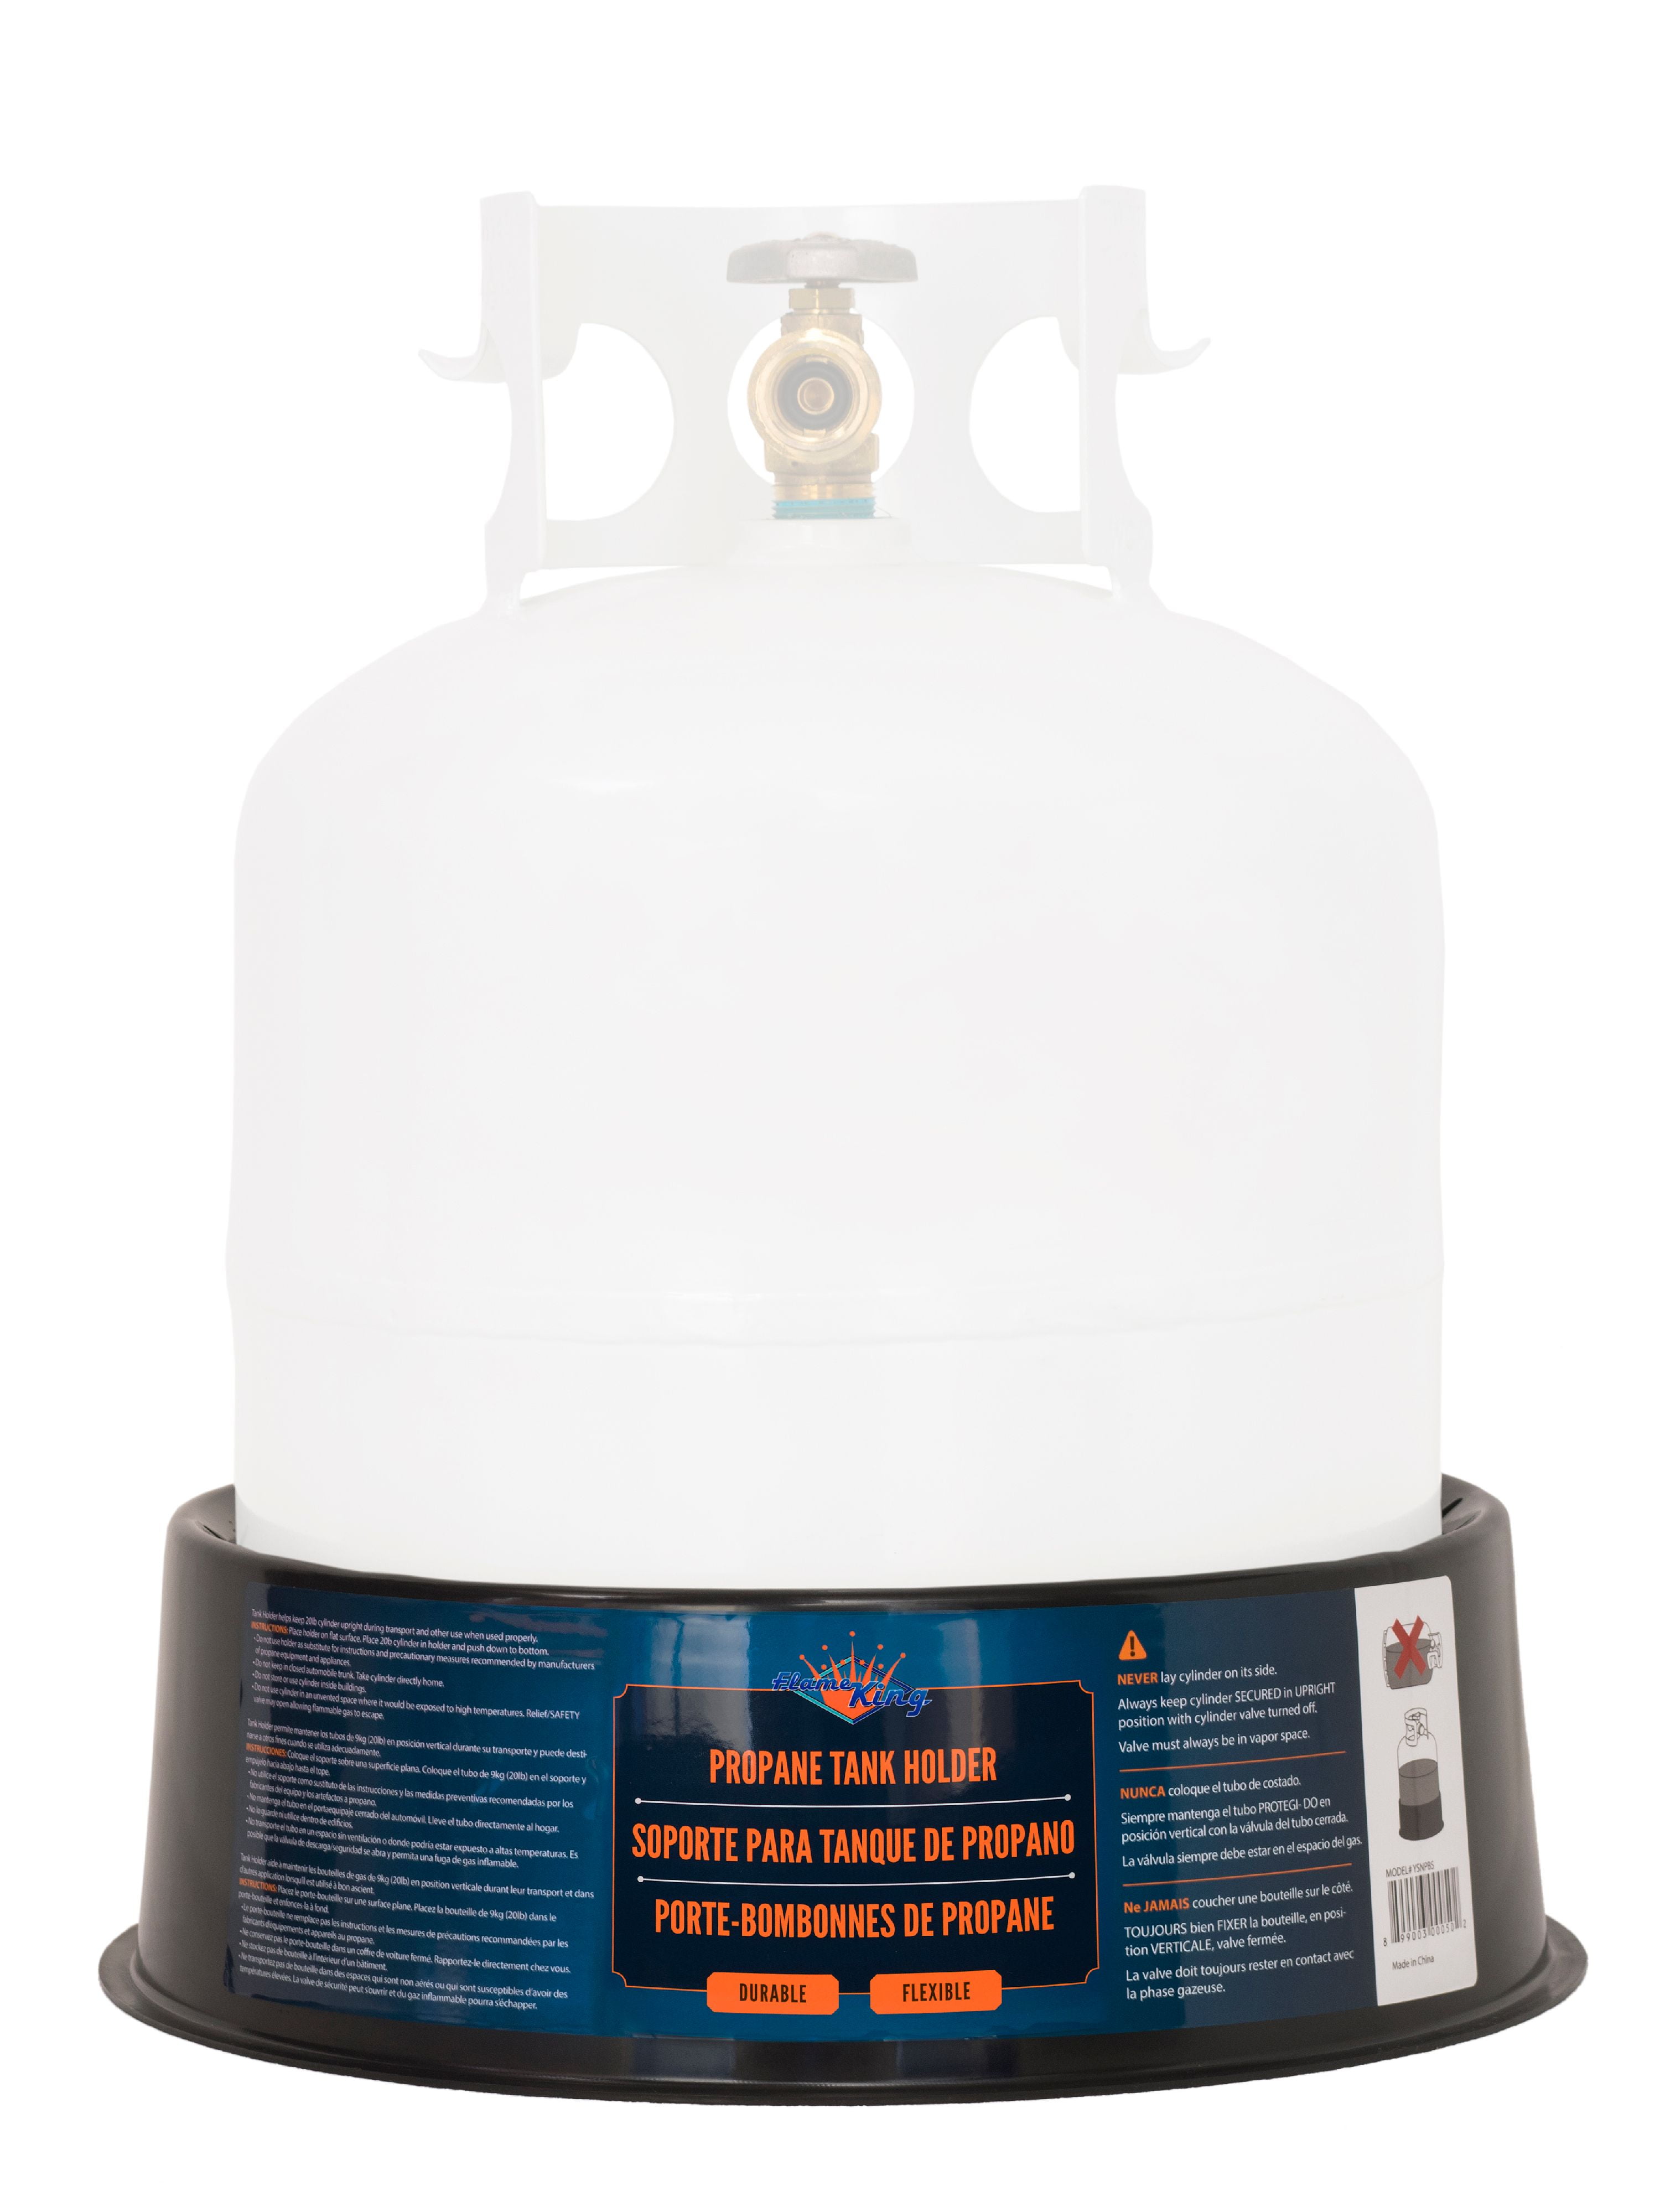 Tank 2 You, Inc. - Propane Delivery Service, Grill Tanks